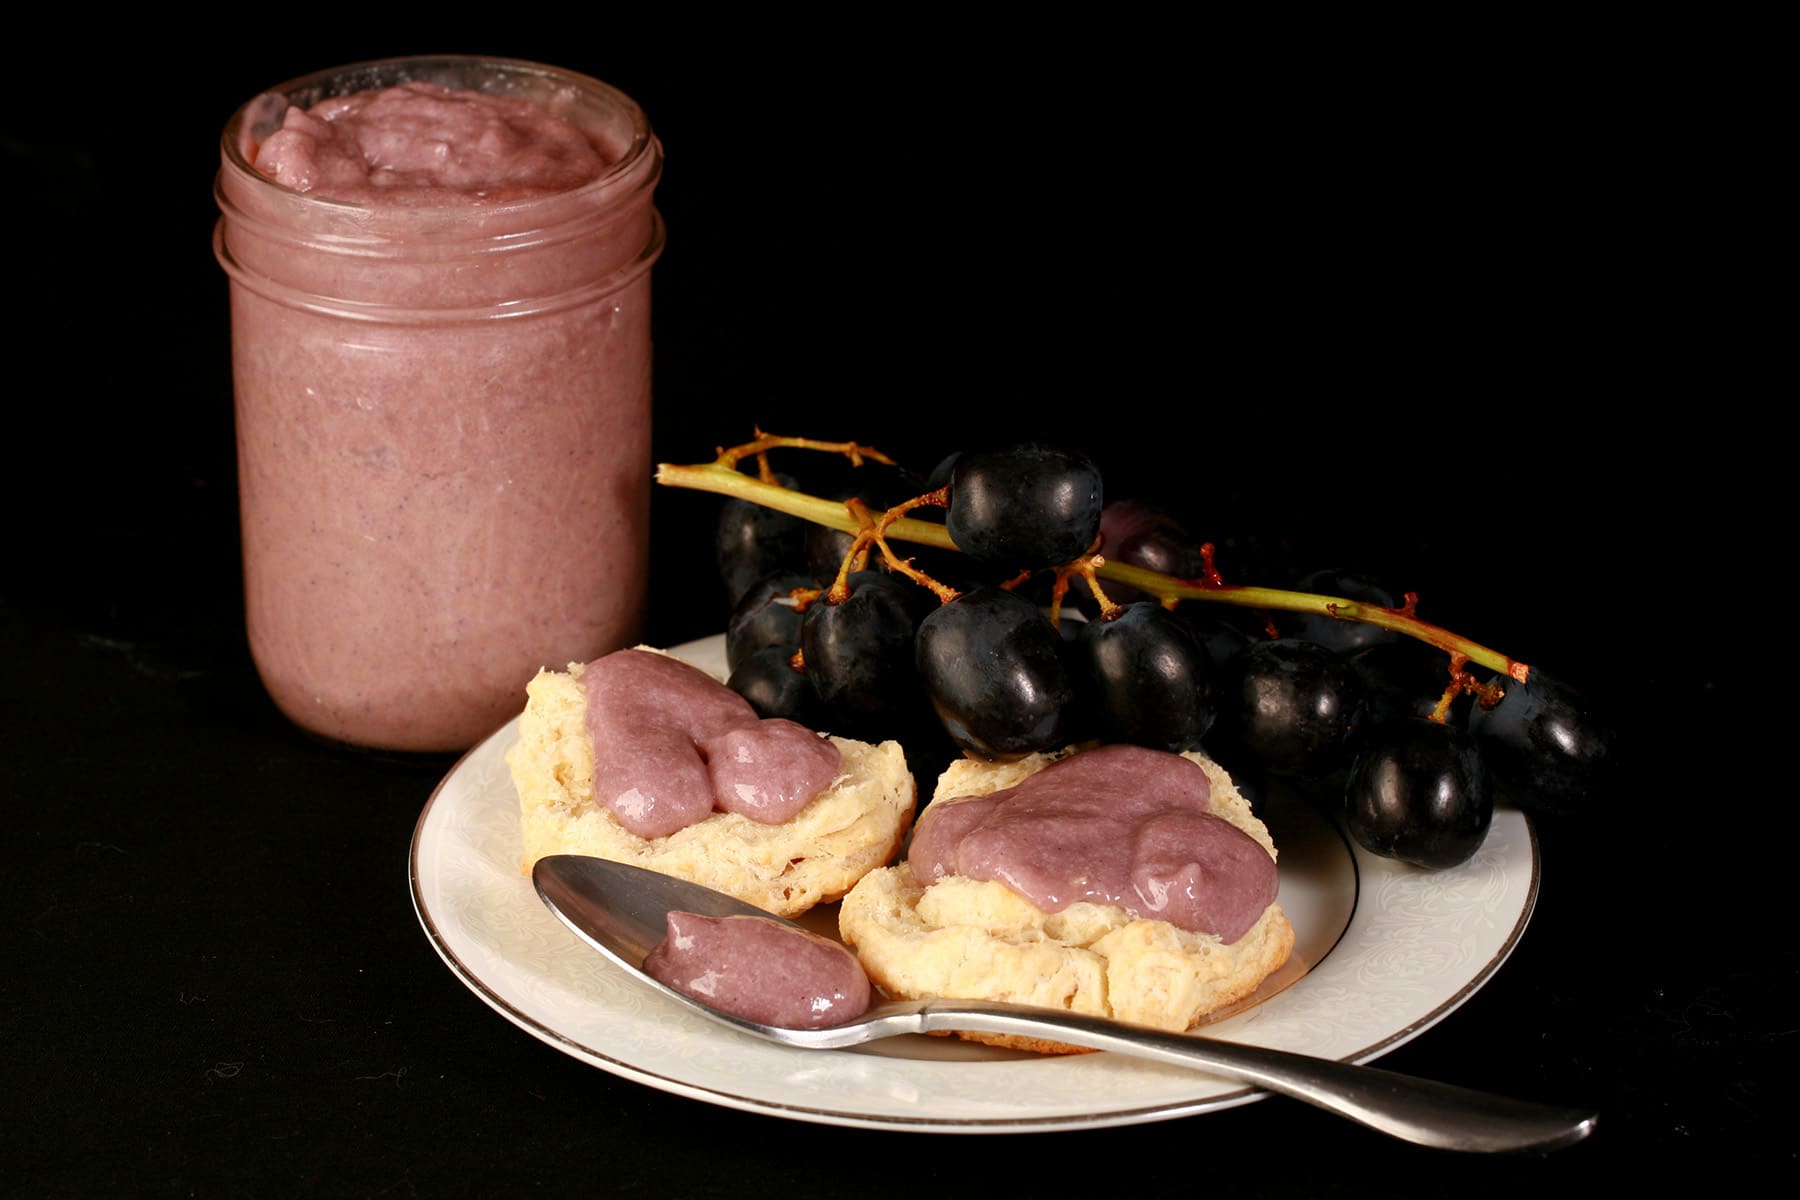 Two biscuits with grape curd on a plate, along with some concord grapes and a spoon of curd.